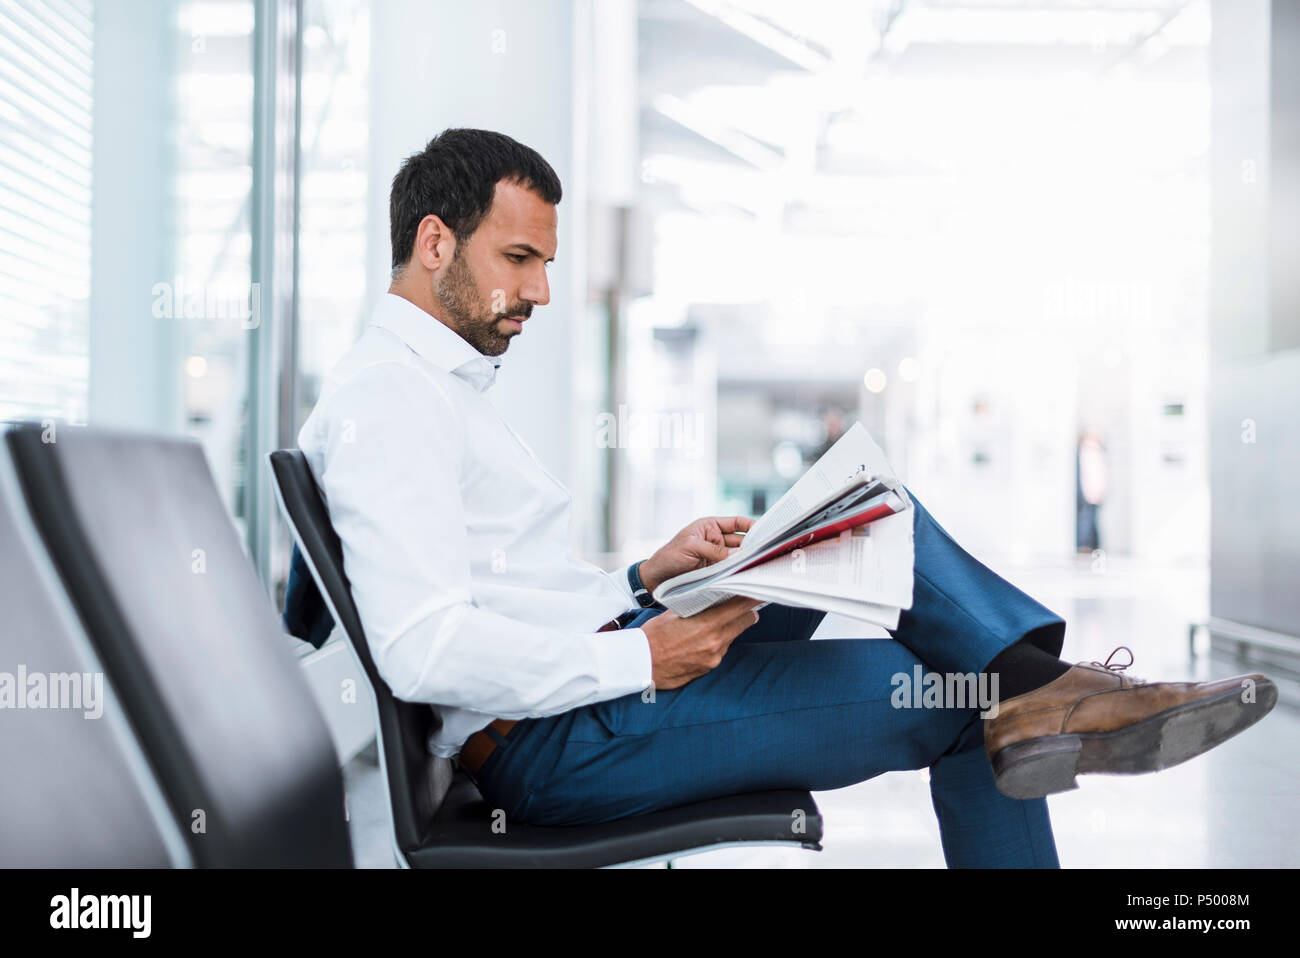 Businessman reading a newspaper in waiting hall Stock Photo